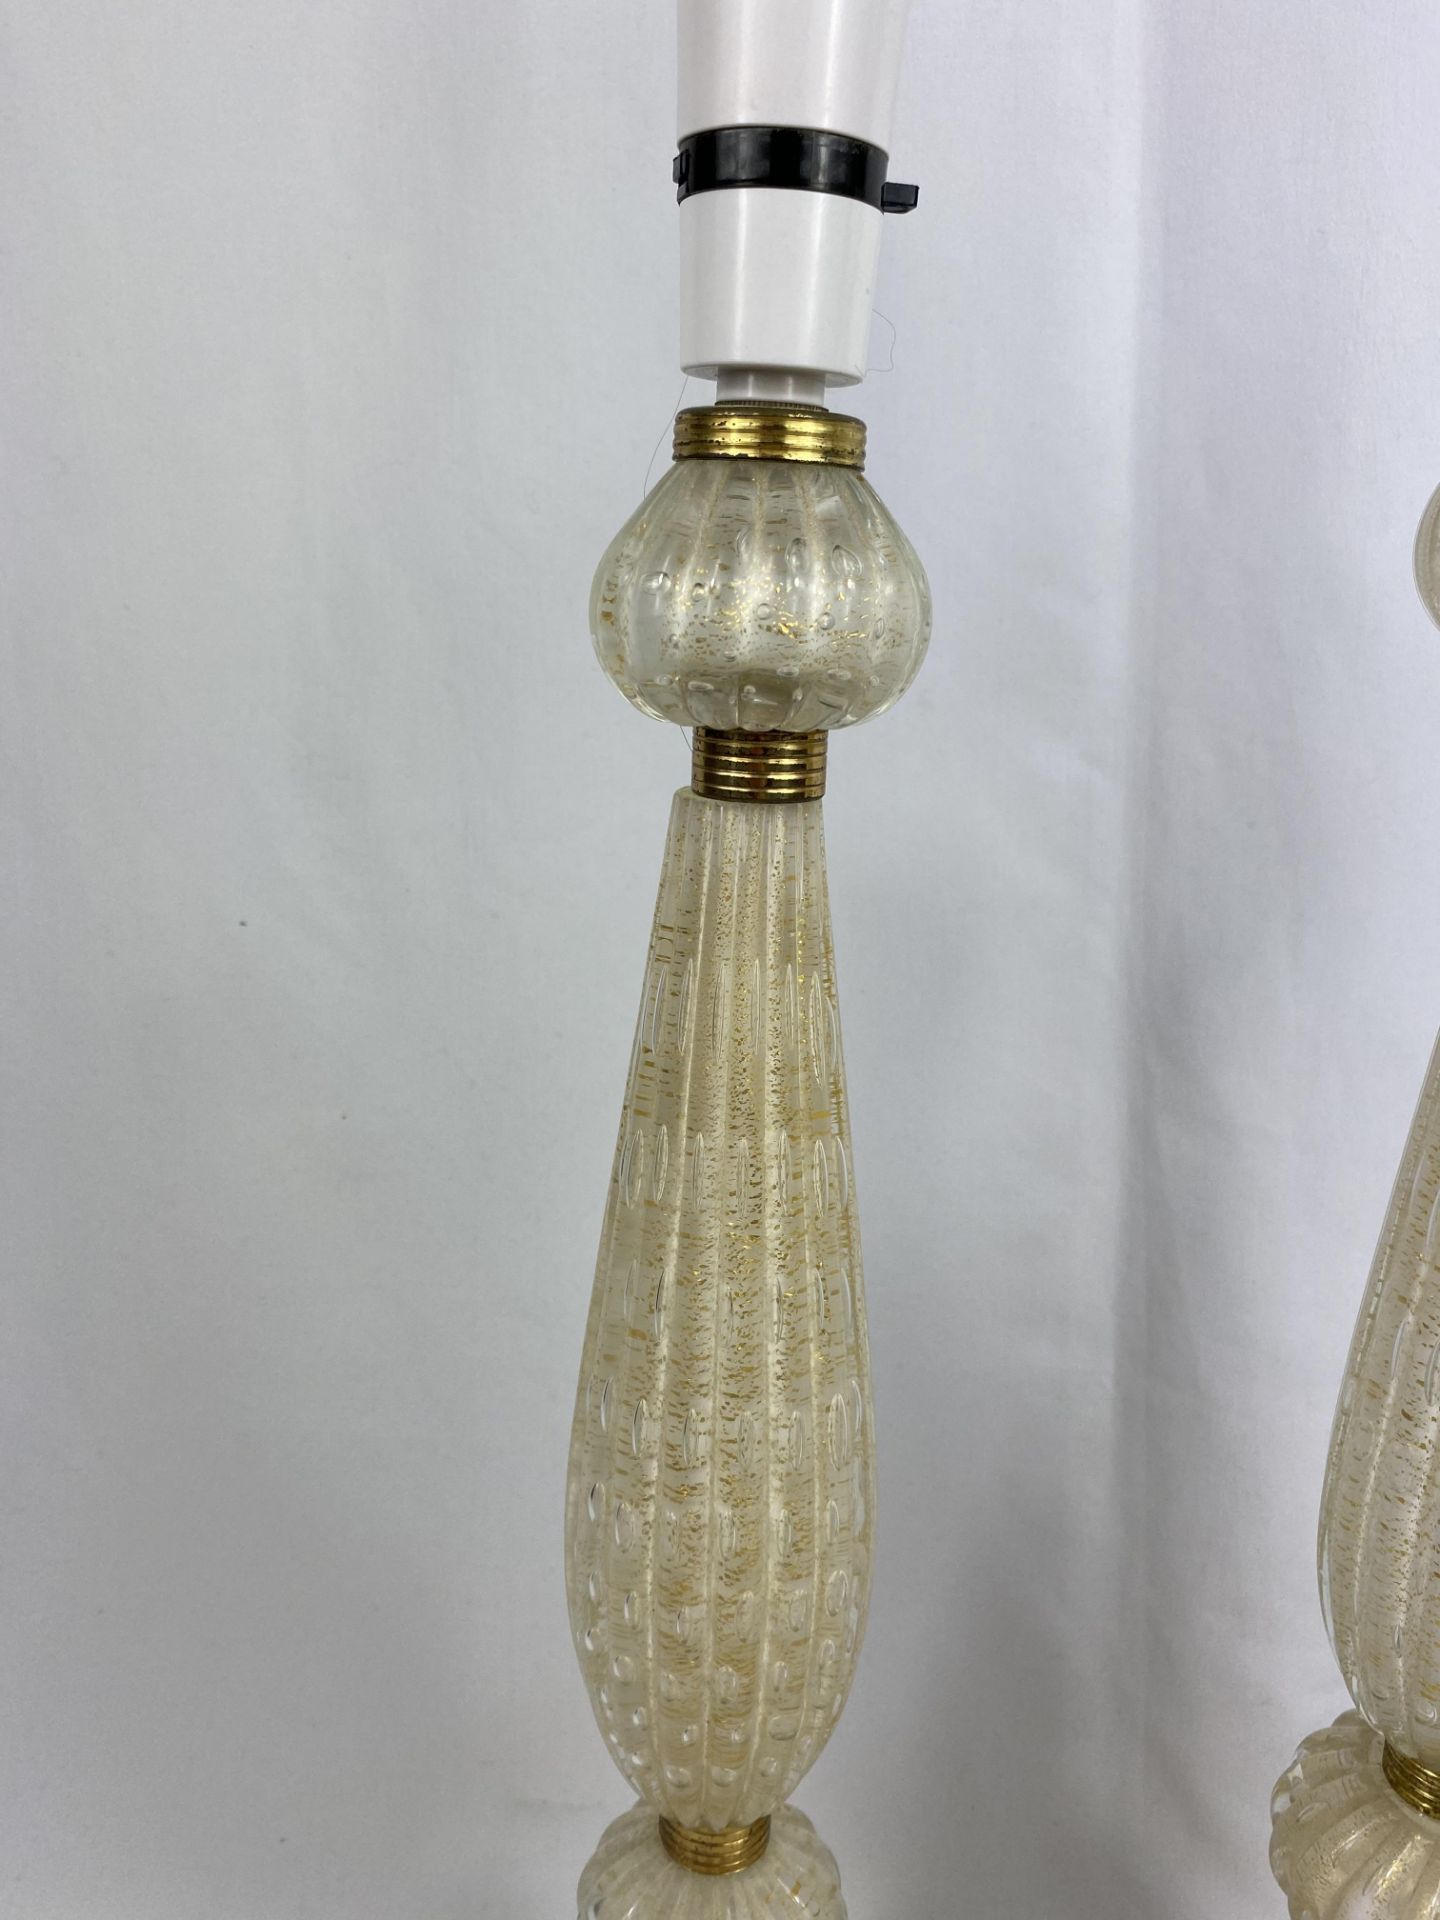 Pair of Barovier & Toso style Murano glass table lamps - Image 5 of 6